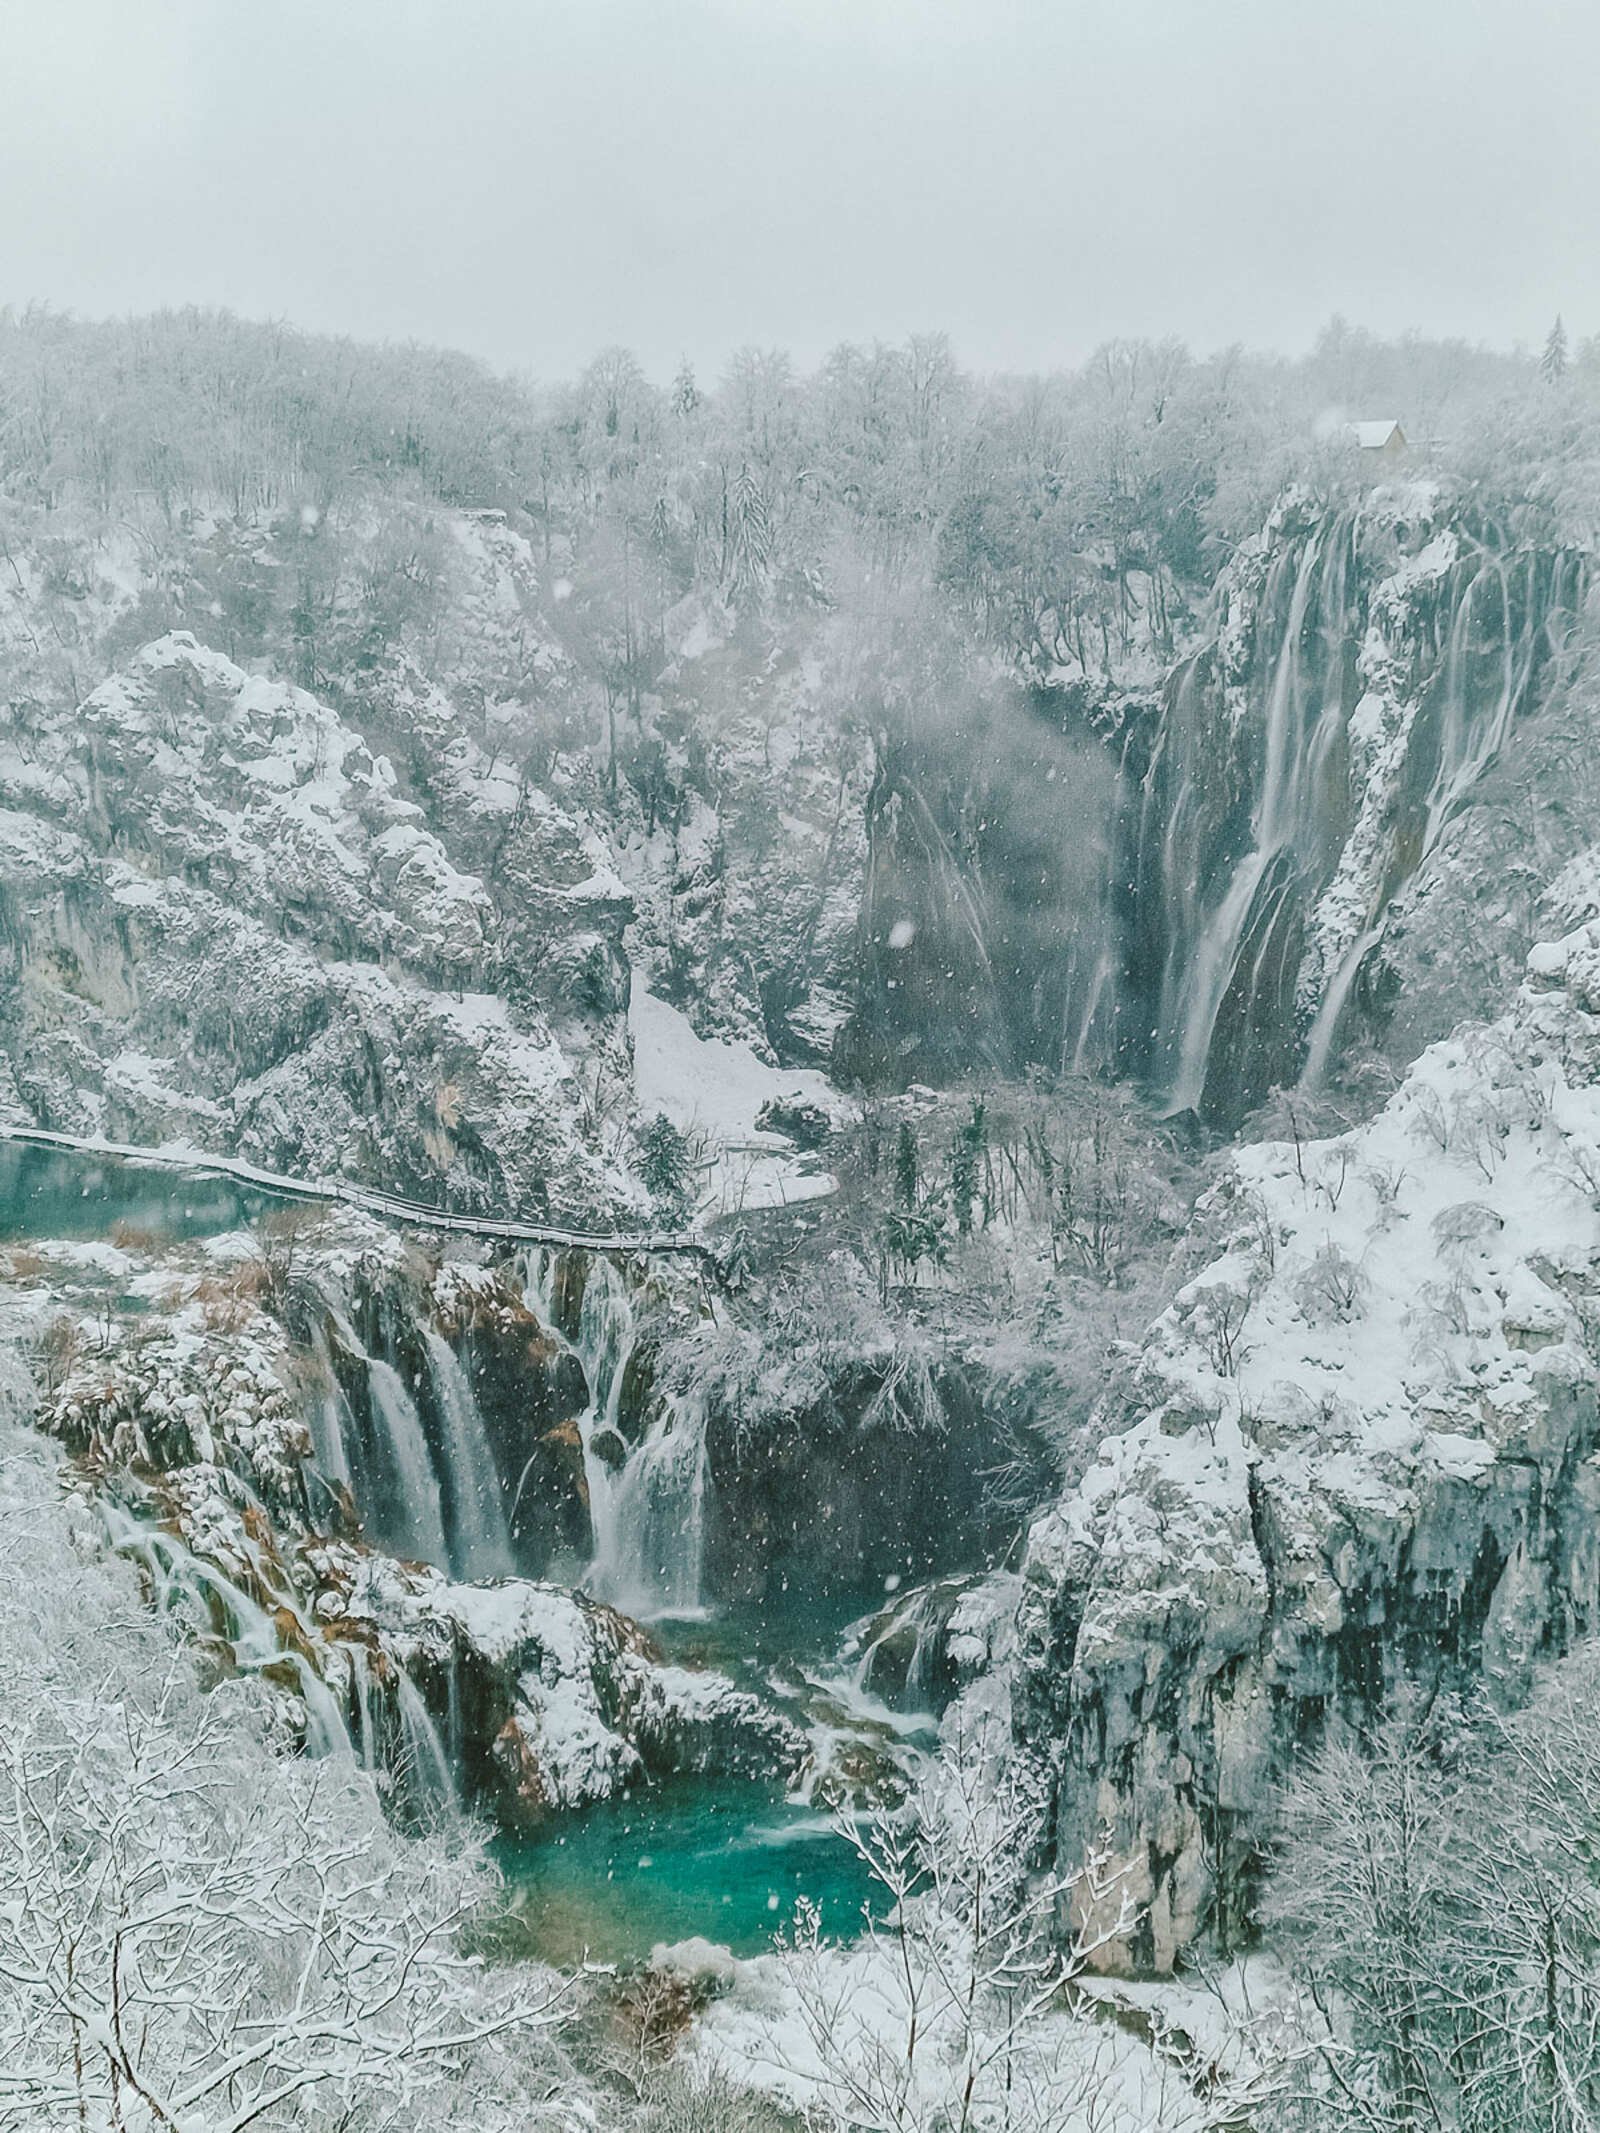 View from a viewing platform of Veliki Slap waterfalls falling in multiple places down a steep cliff into a turquoise blue lake below